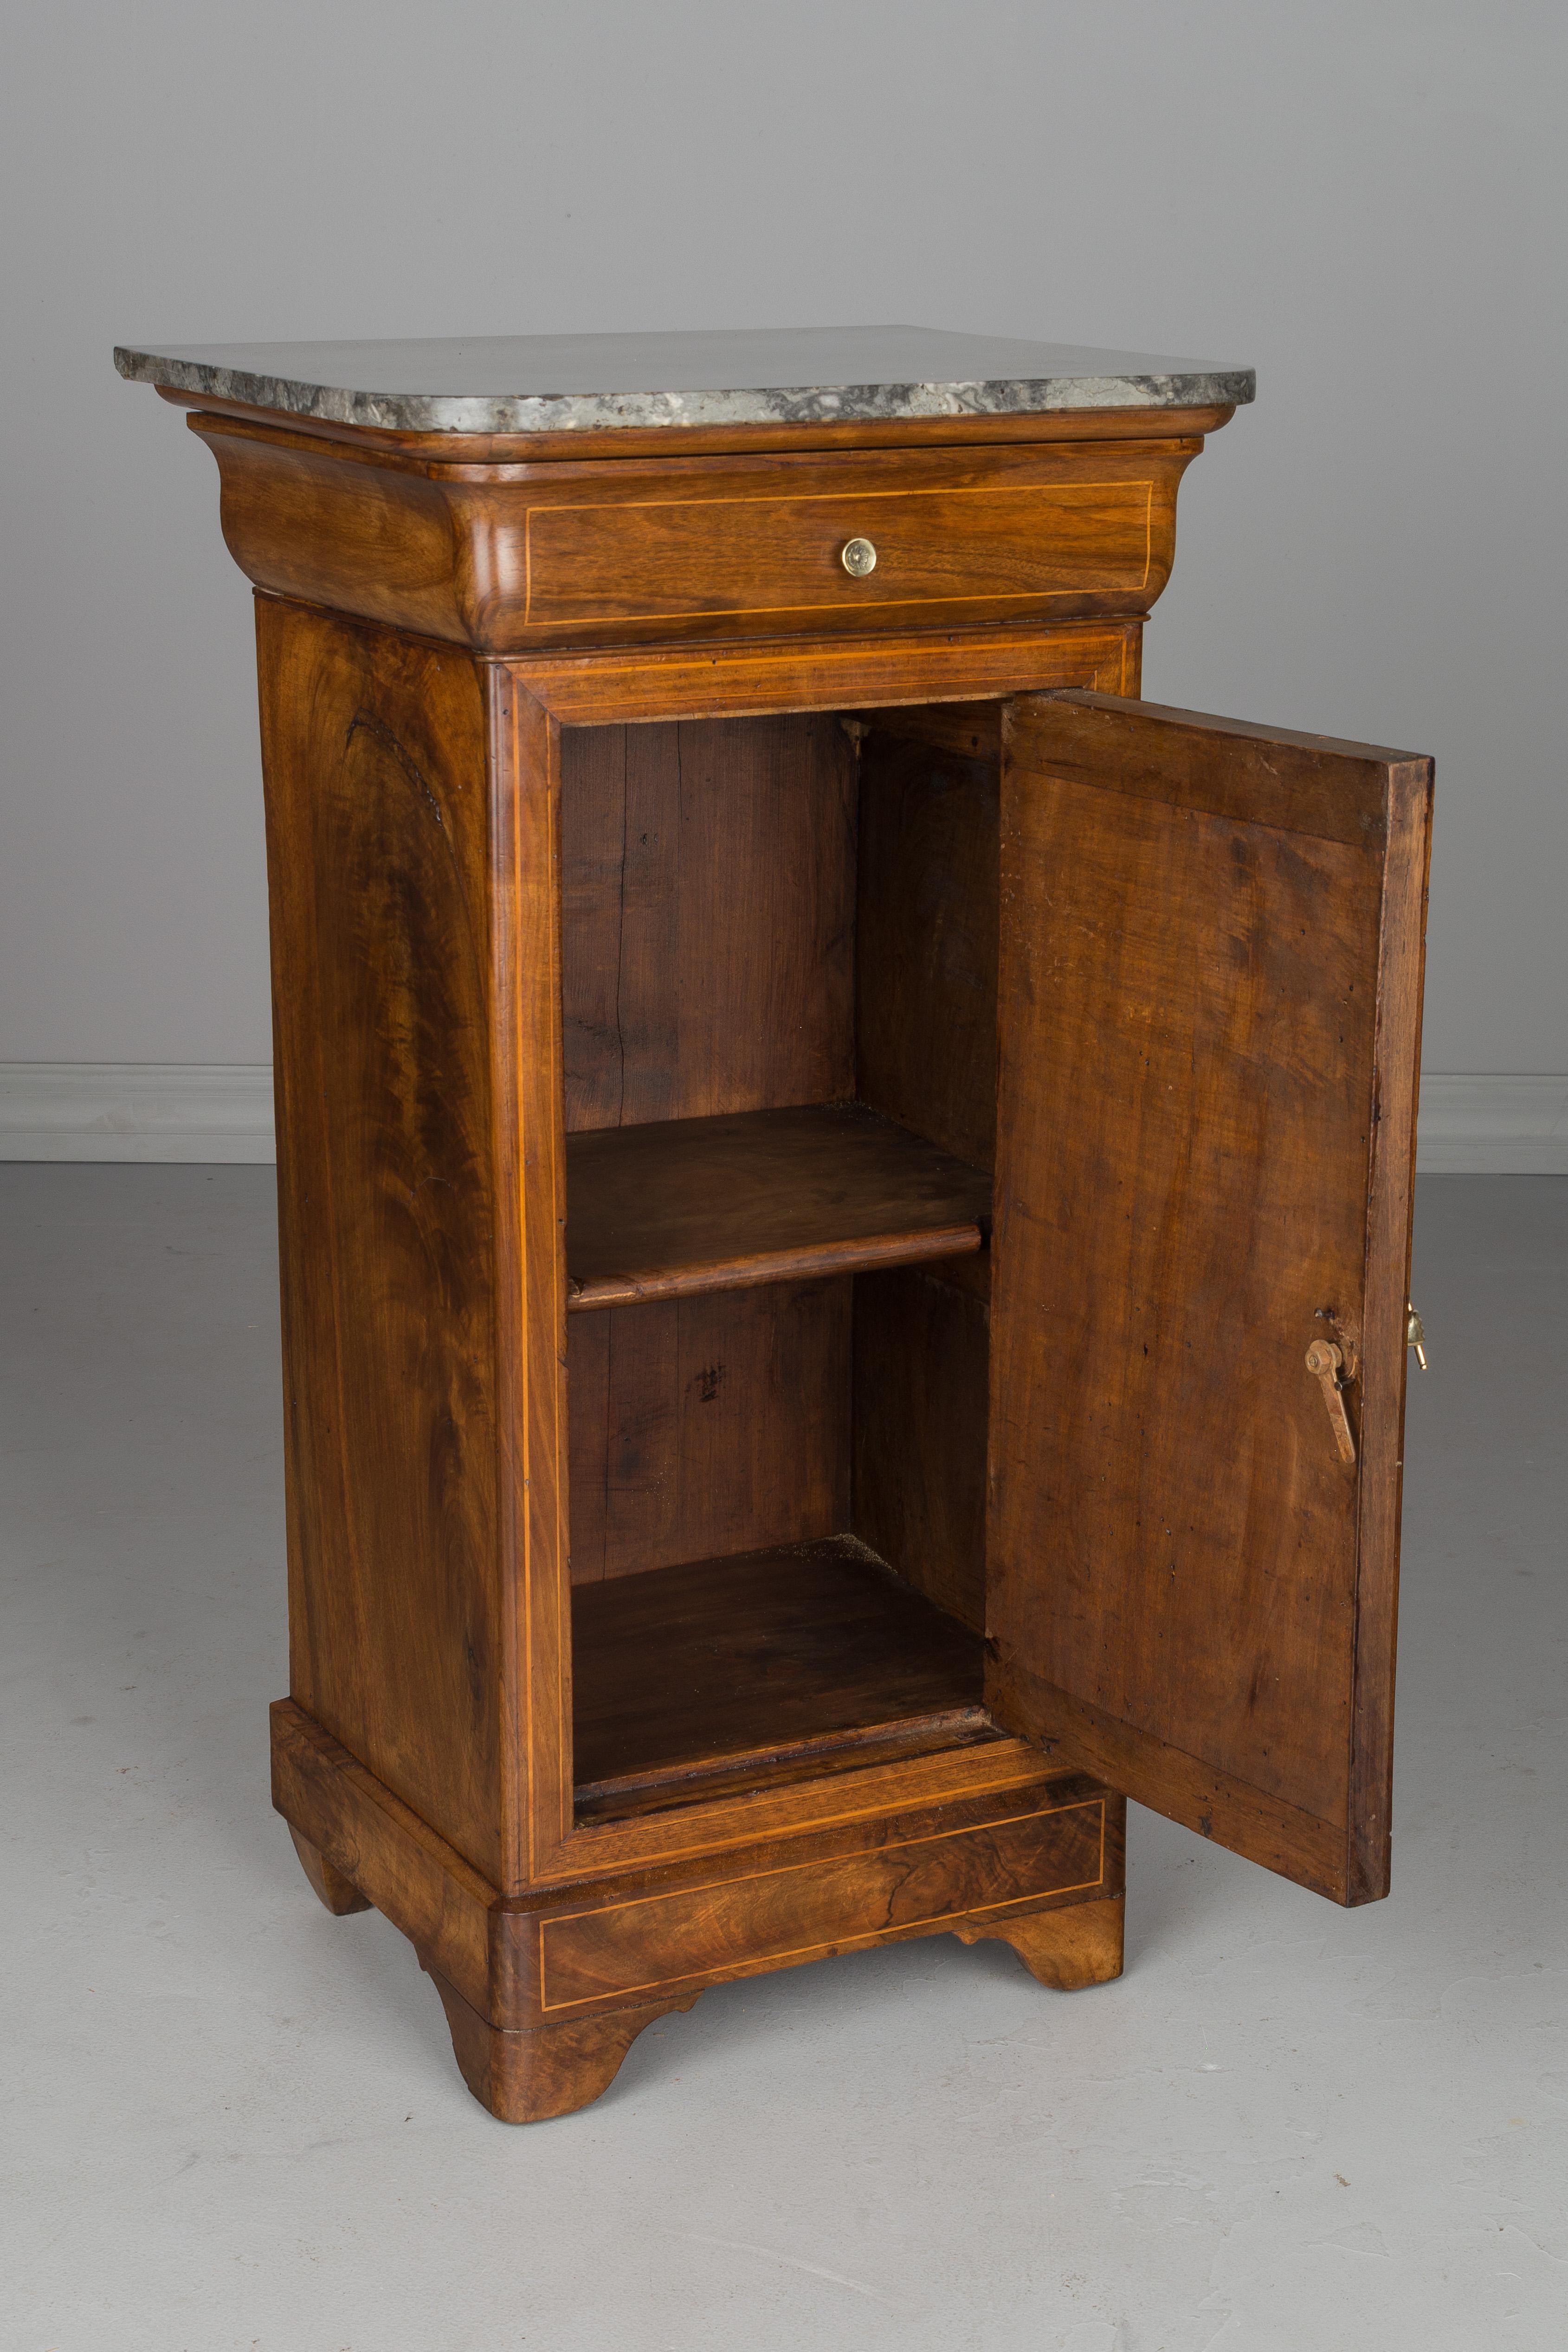 An early 19th century French Charles X side table or nightstand, made of walnut with fine inlay trim. Beautiful quality to the wood, the sides each with similar large knots. Waxed finish. Single dovetailed drawer with brass knob. Cabinet door with